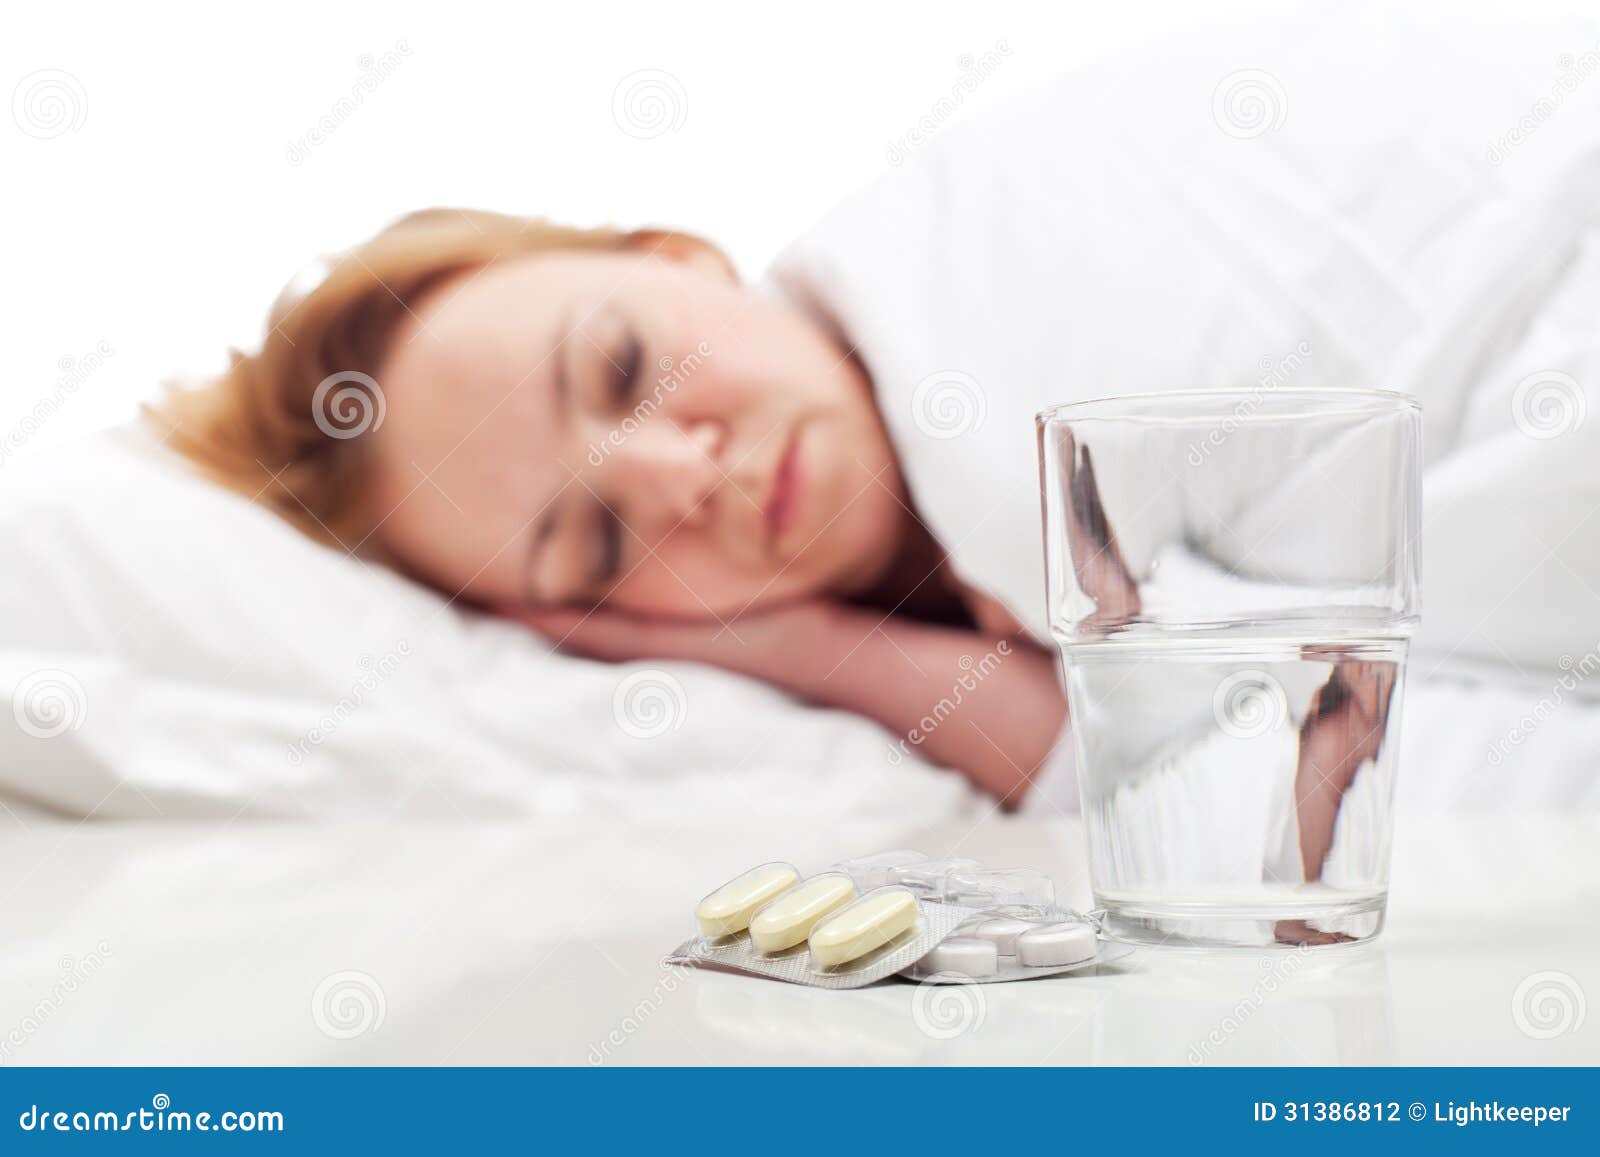 woman fighting sickness with pills and resting